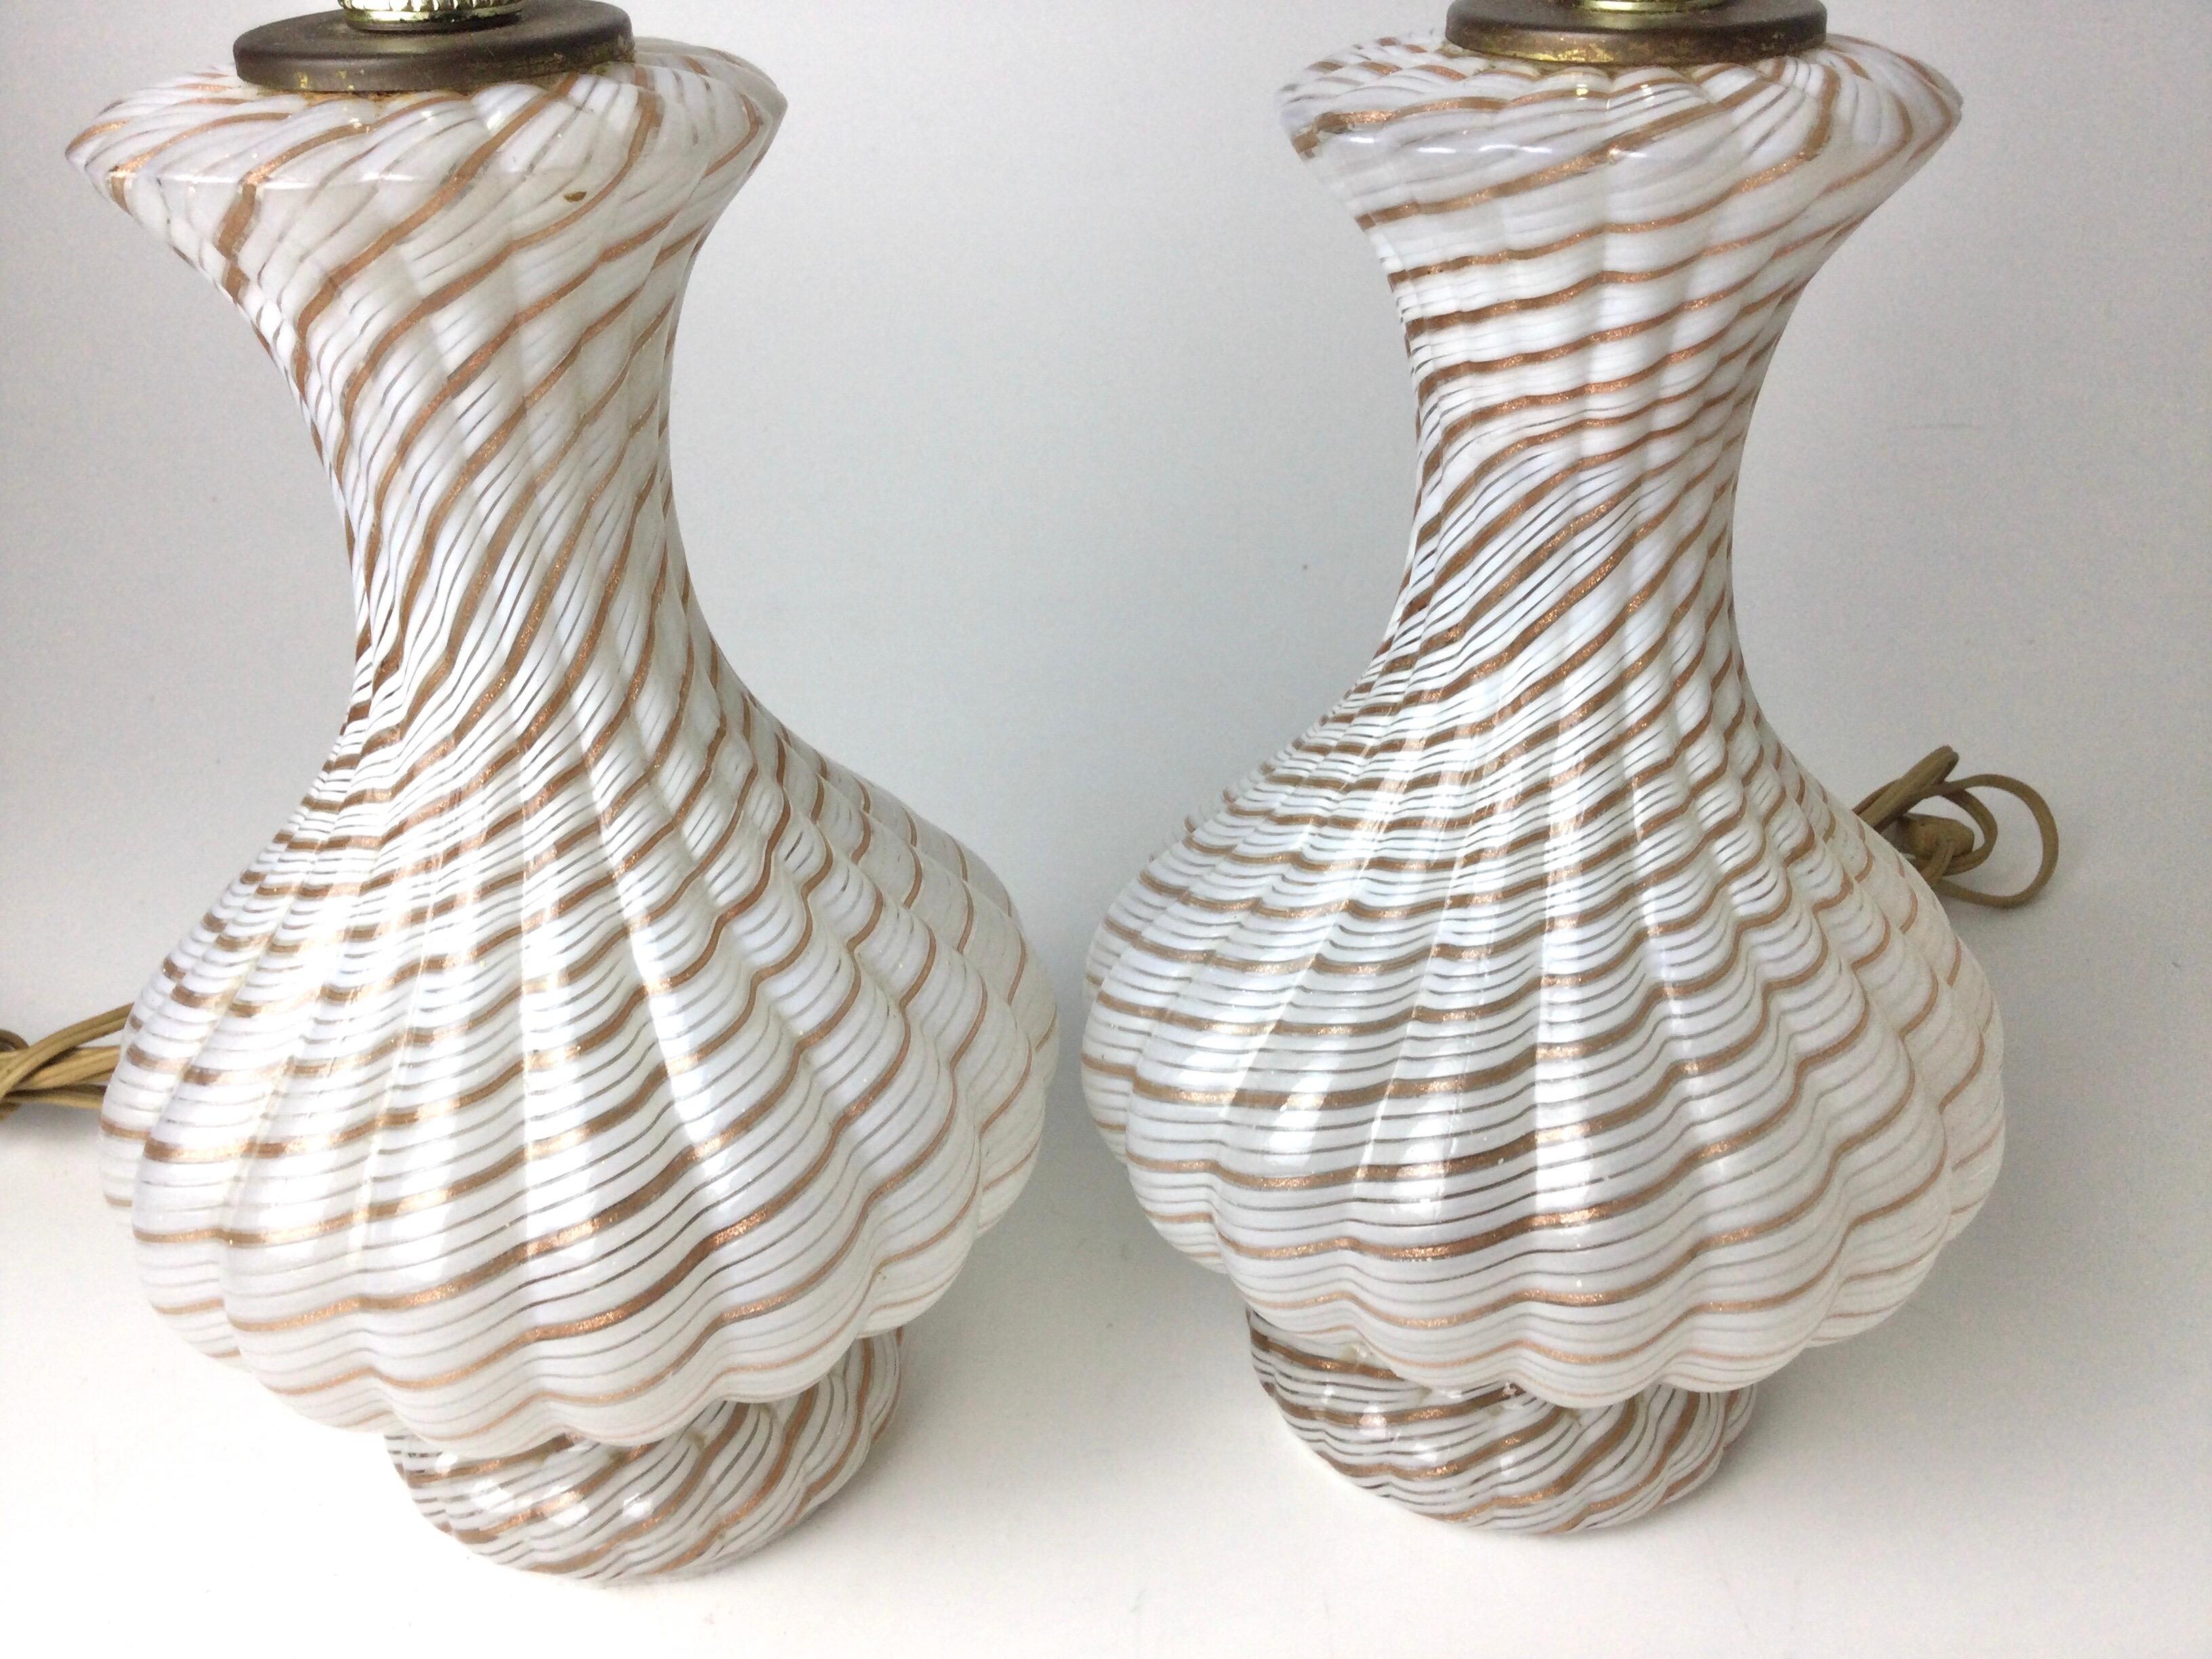 Nice pair of small bedroom lamps. Each 12 1/2” tall to the top of the sockets. 5 1/2” in diameter at the widest point. The glass has ribbons of white and gold running through. Wording is good. New felt on bottoms.